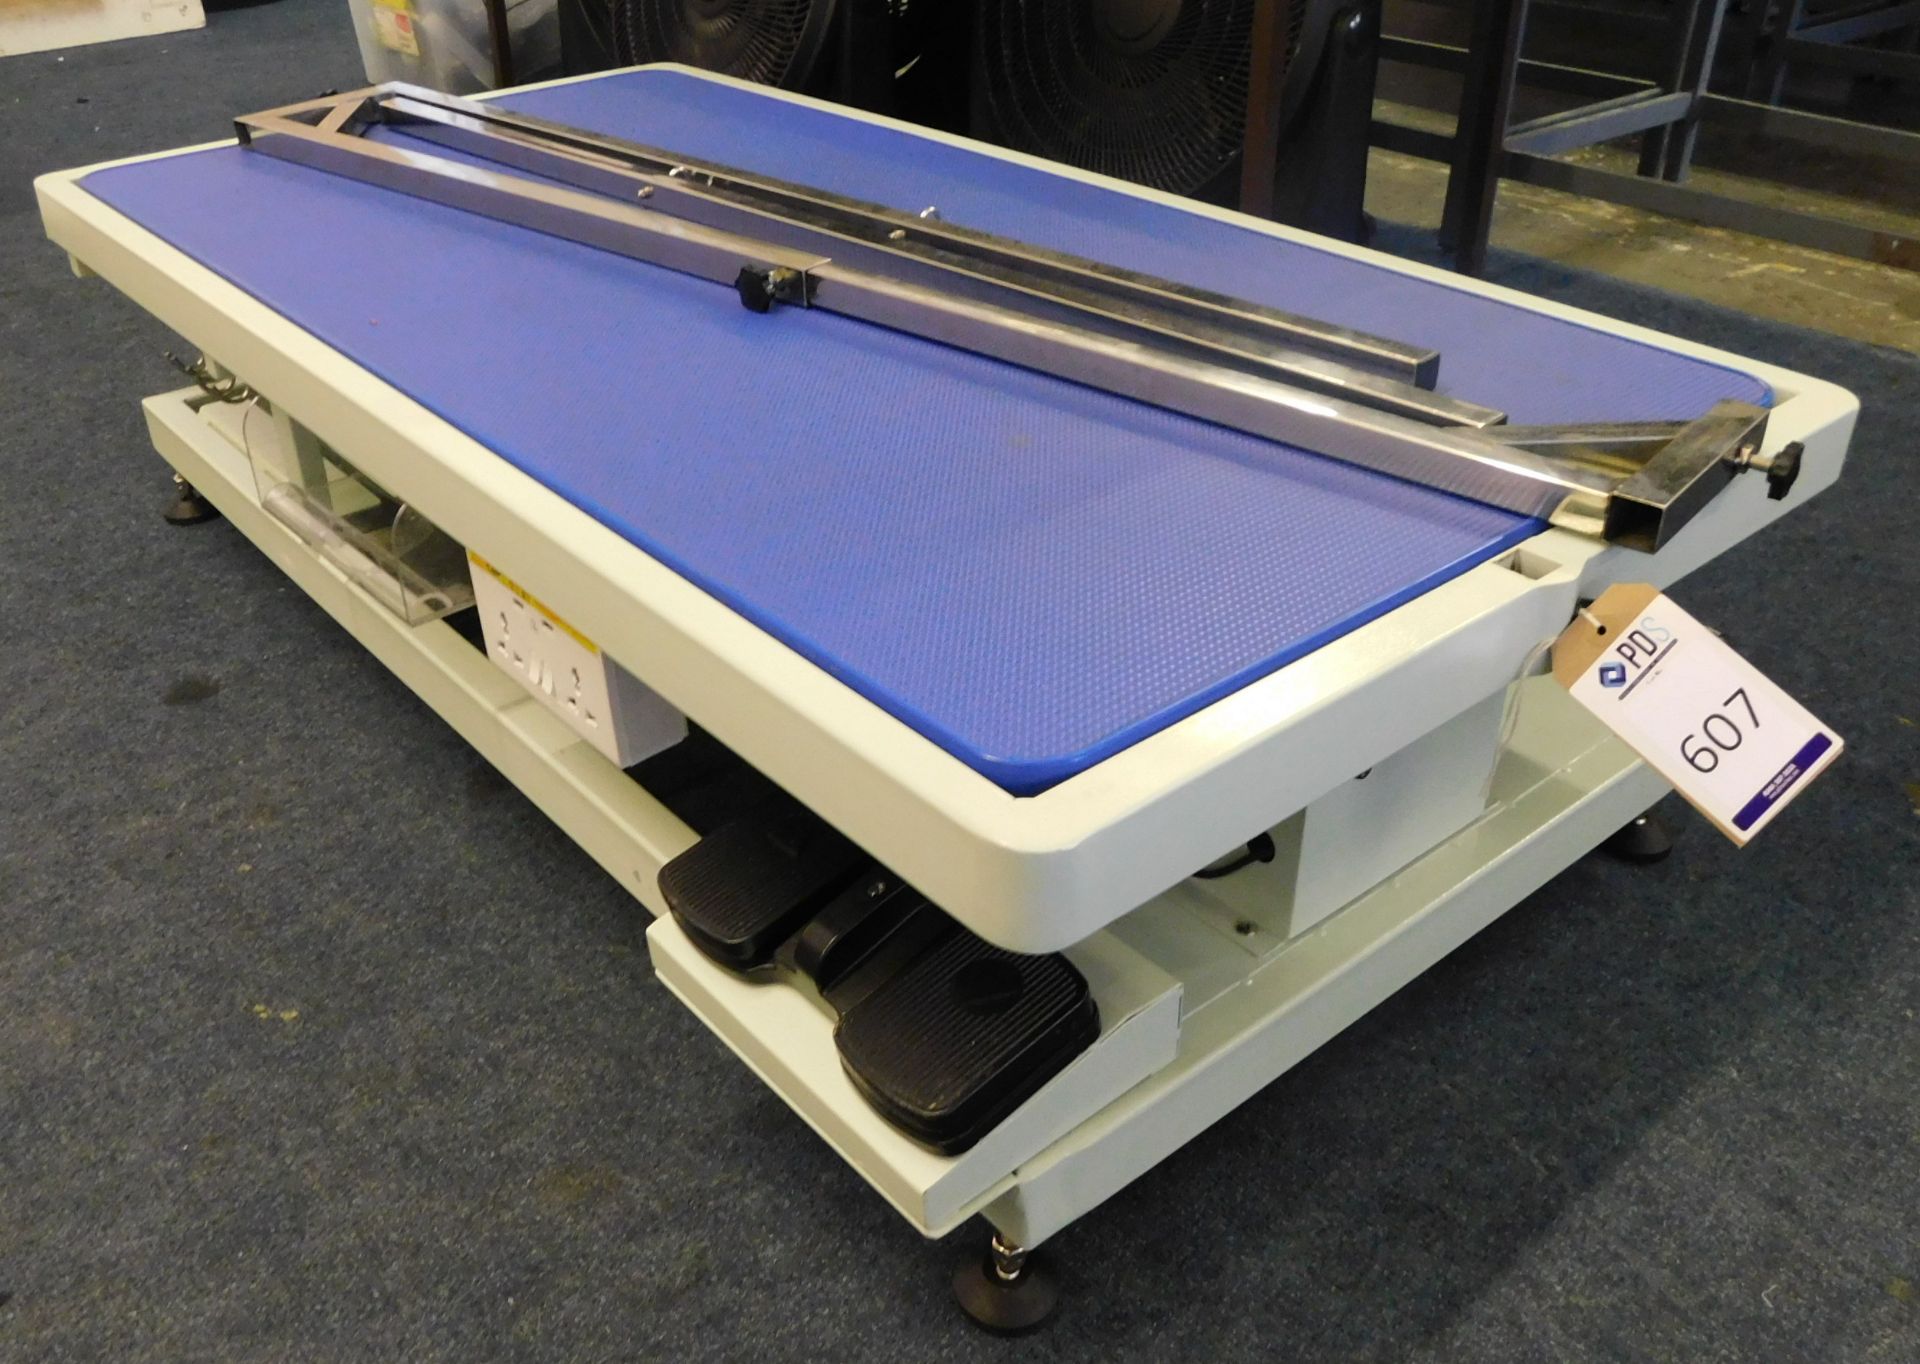 Unbadged Electric Dog Grooming Hydraulic Table (Location: Stockport. Please Refer to General Notes) - Image 2 of 6